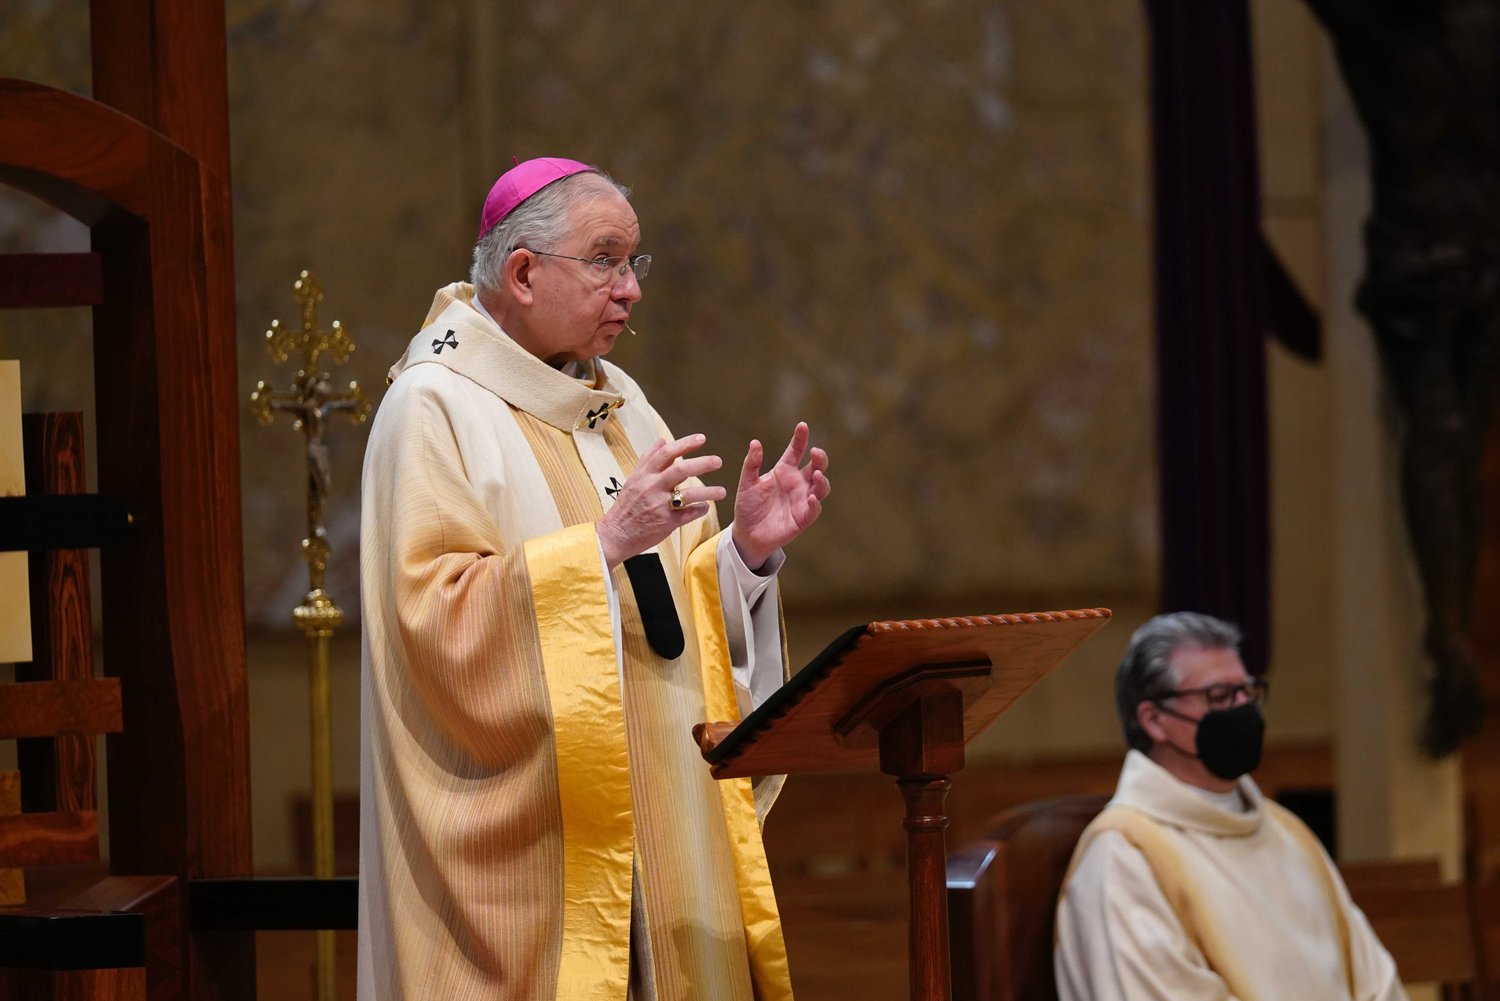 Archbishop José H. Gomez of Los Angeles, president of the U.S. Conference of Catholic Bishops, celebrates the National Mass on the Solemnity of St. Joseph at the the Cathedral of Our Lady of the Angels in Los Angeles March 19, 2021.